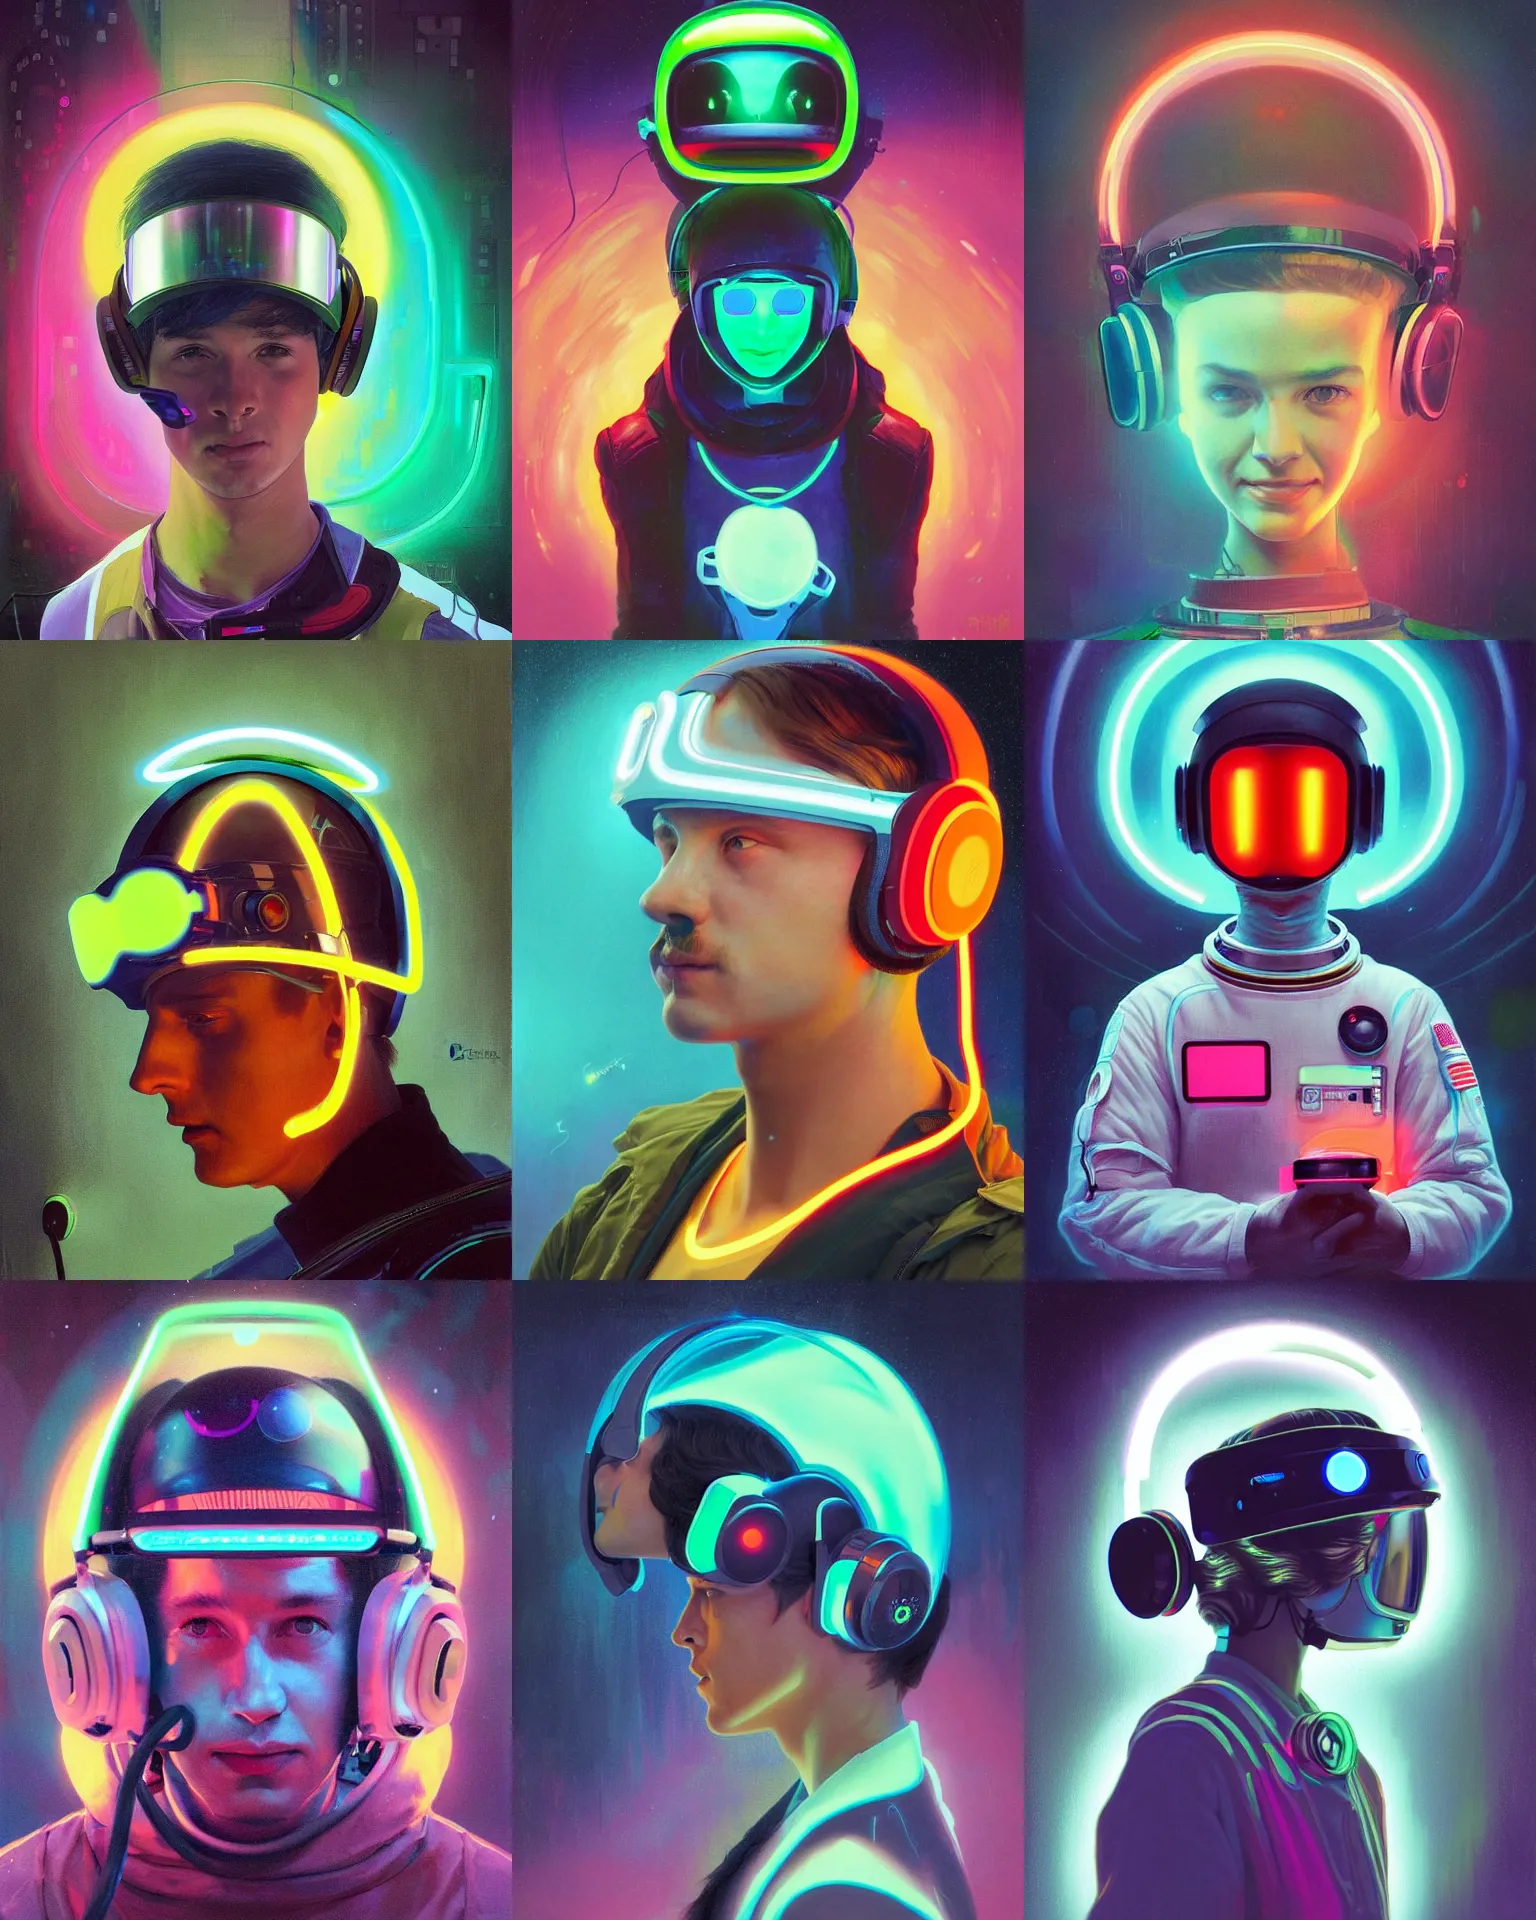 Prompt: future coder looking on, glowing visor over eyes and sleek neon headphones, neon accents, desaturated headshot portrait painting by ilya repin, dean cornwall, rhads, tom whalen, alex grey, alphonse mucha, astronaut cyberpunk electric fashion photography